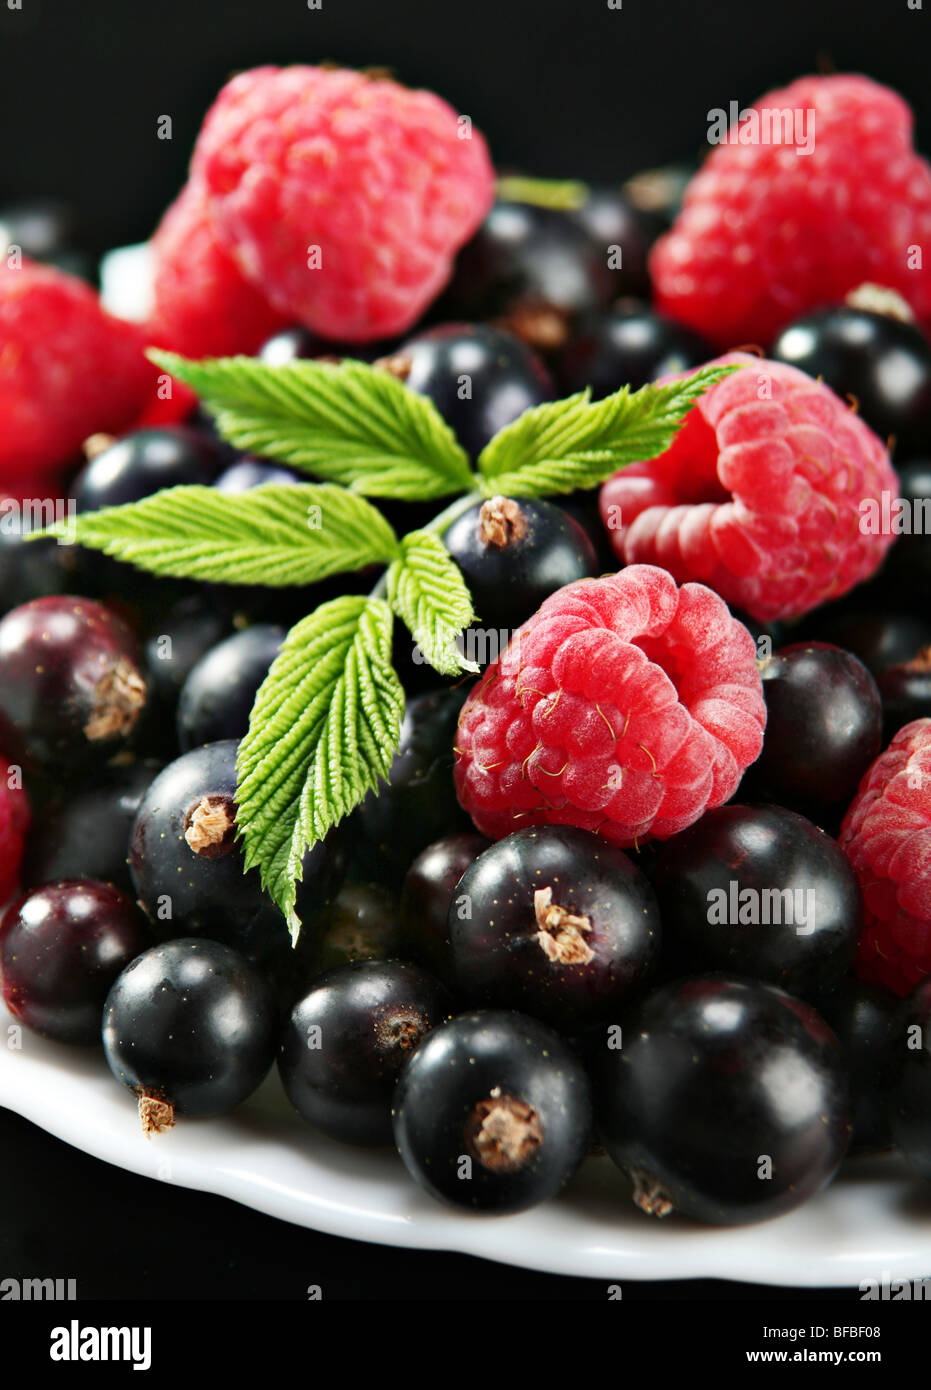 Raspberry with leaf on black currant detail Stock Photo